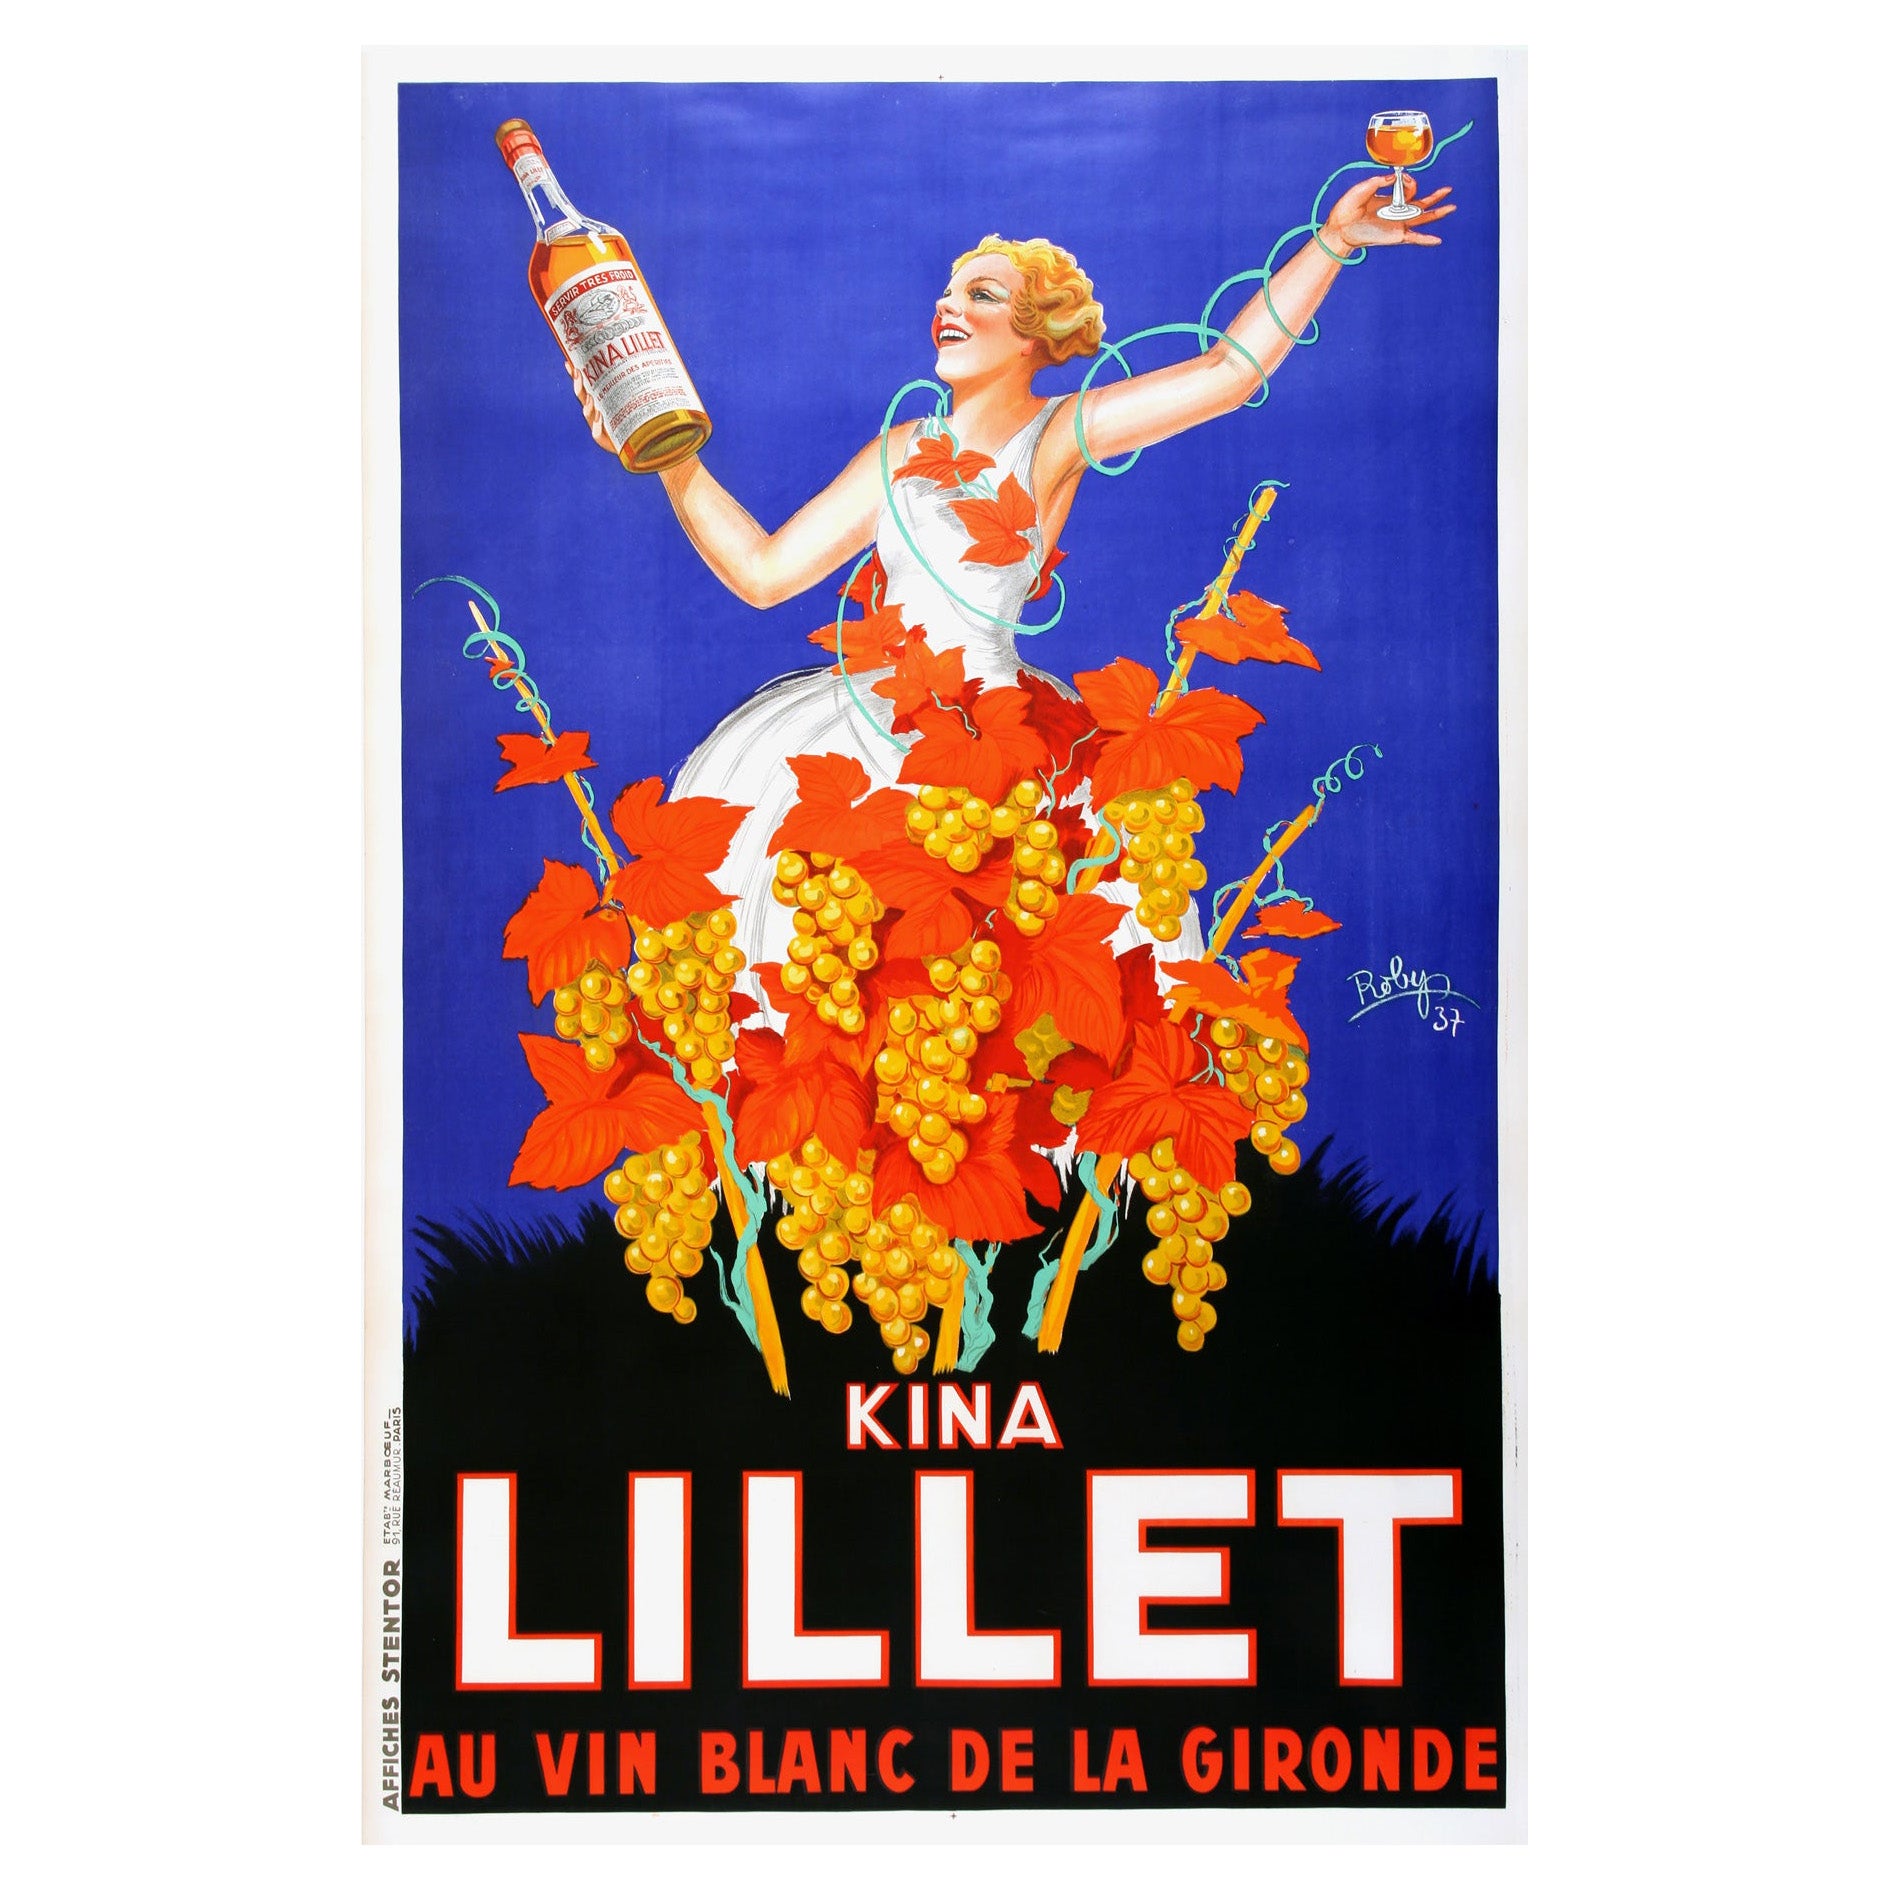 Kina Lillet, 1937 Vintage French Alcohol Advertising Poster, Robys For Sale